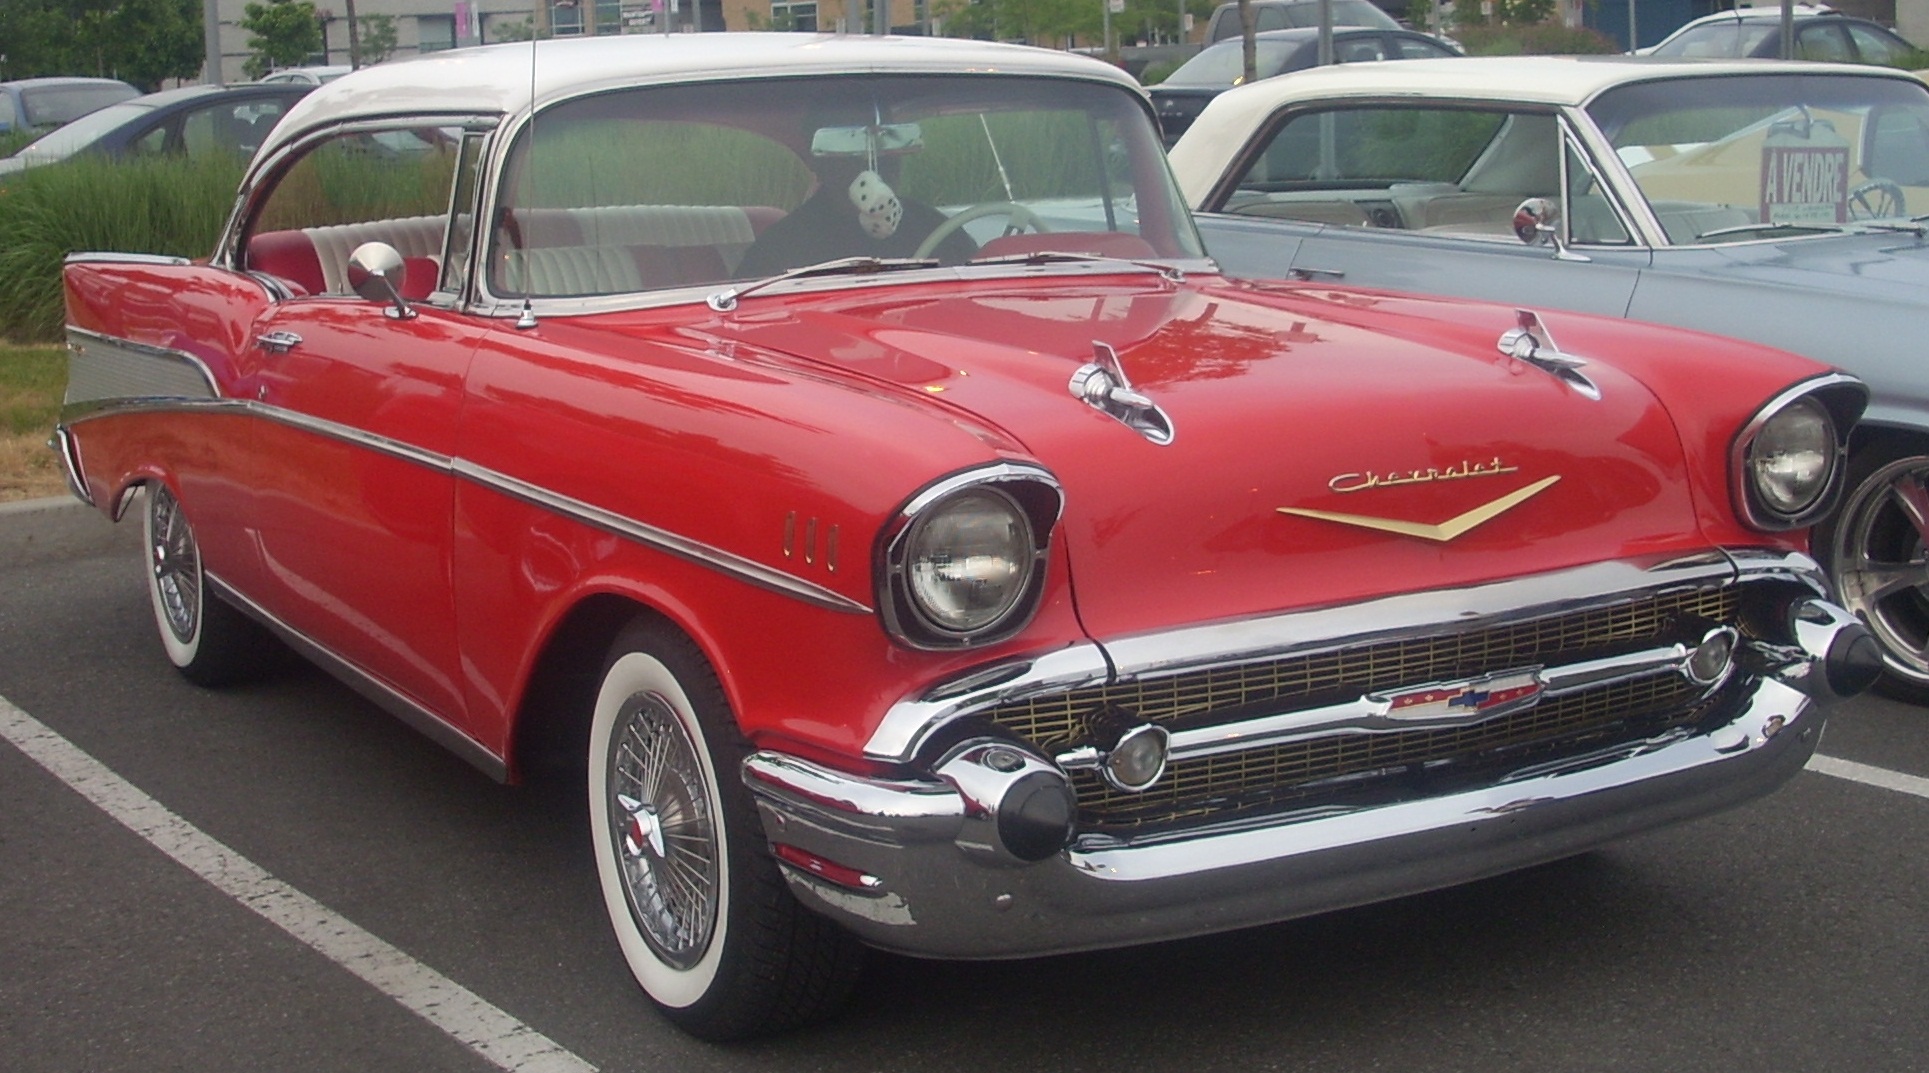 Rediscovering the Icon: The 1957 Chevy Bel Air